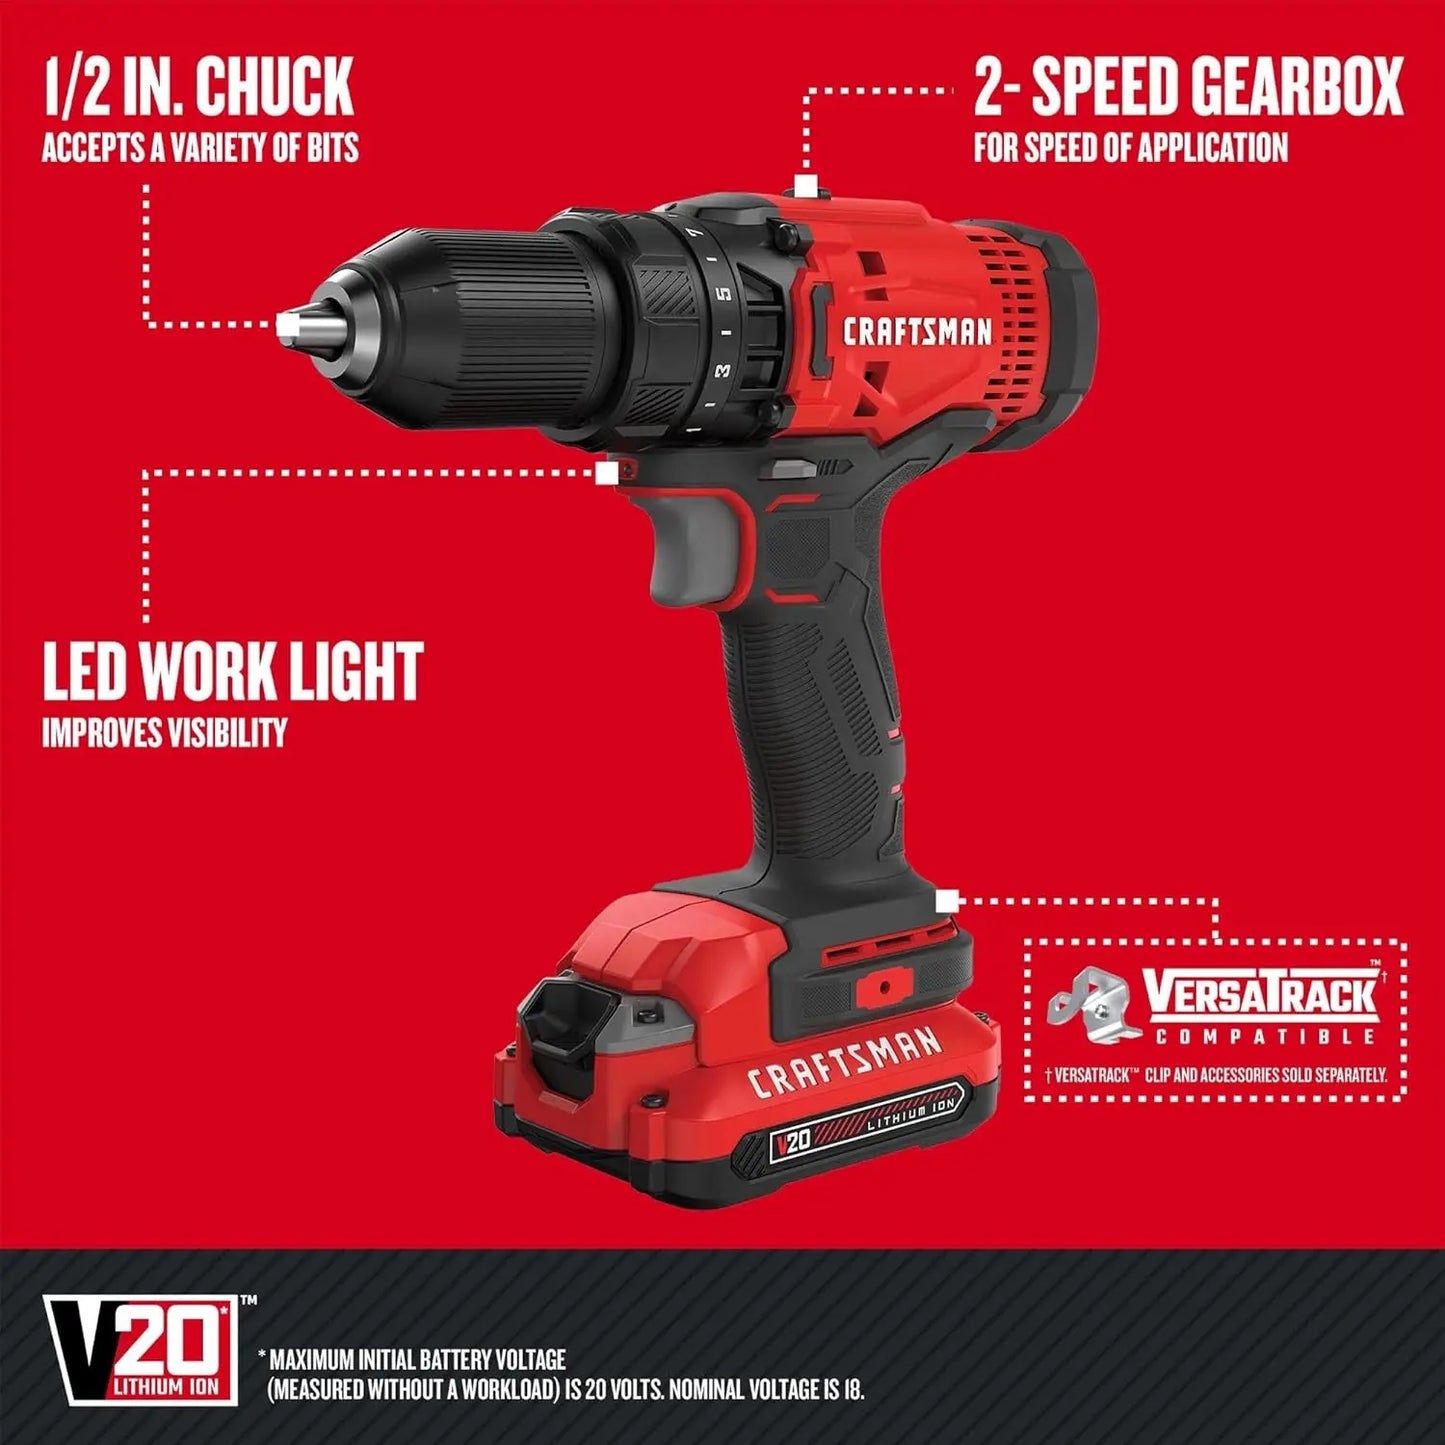 V20 MAX Cordless Drill and Impact Driver, Power Tool Combo Kit with 2 Batteries and Charger (CMCK200C2AM)